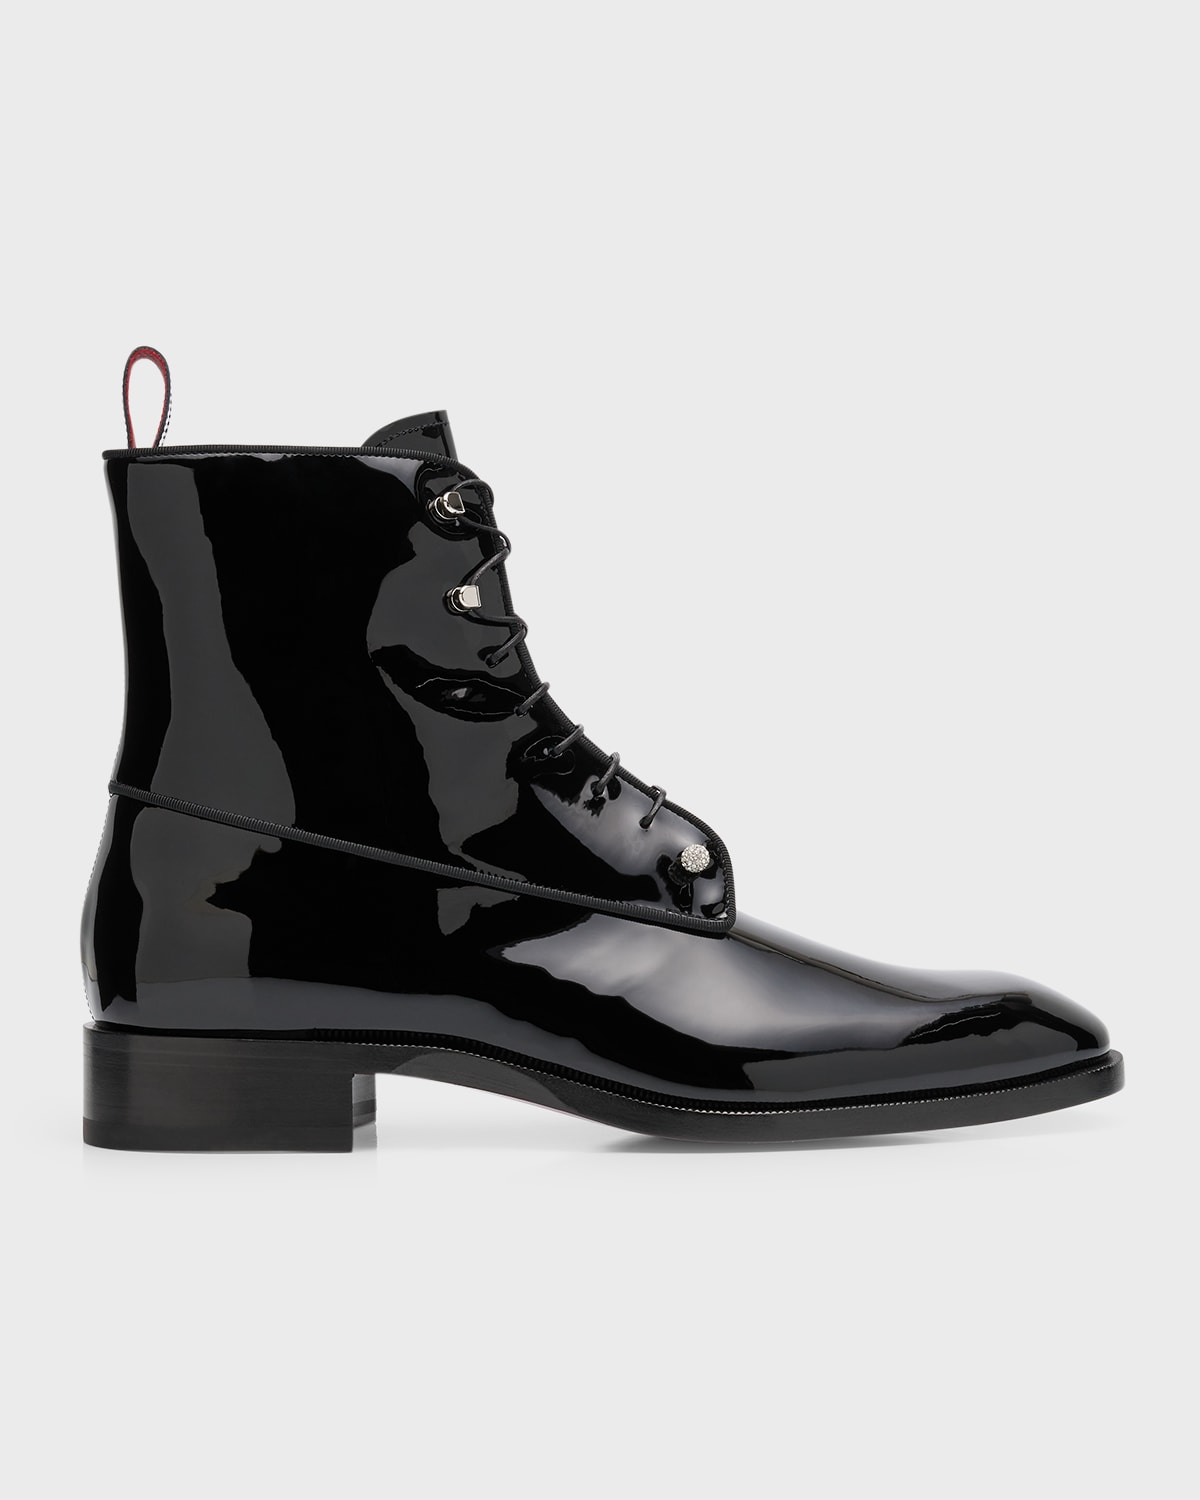 CHRISTIAN LOUBOUTIN MEN'S CHAMBELIBOOT NIGHT STRASS PATENT LEATHER PIERCING LACE-UP BOOTS